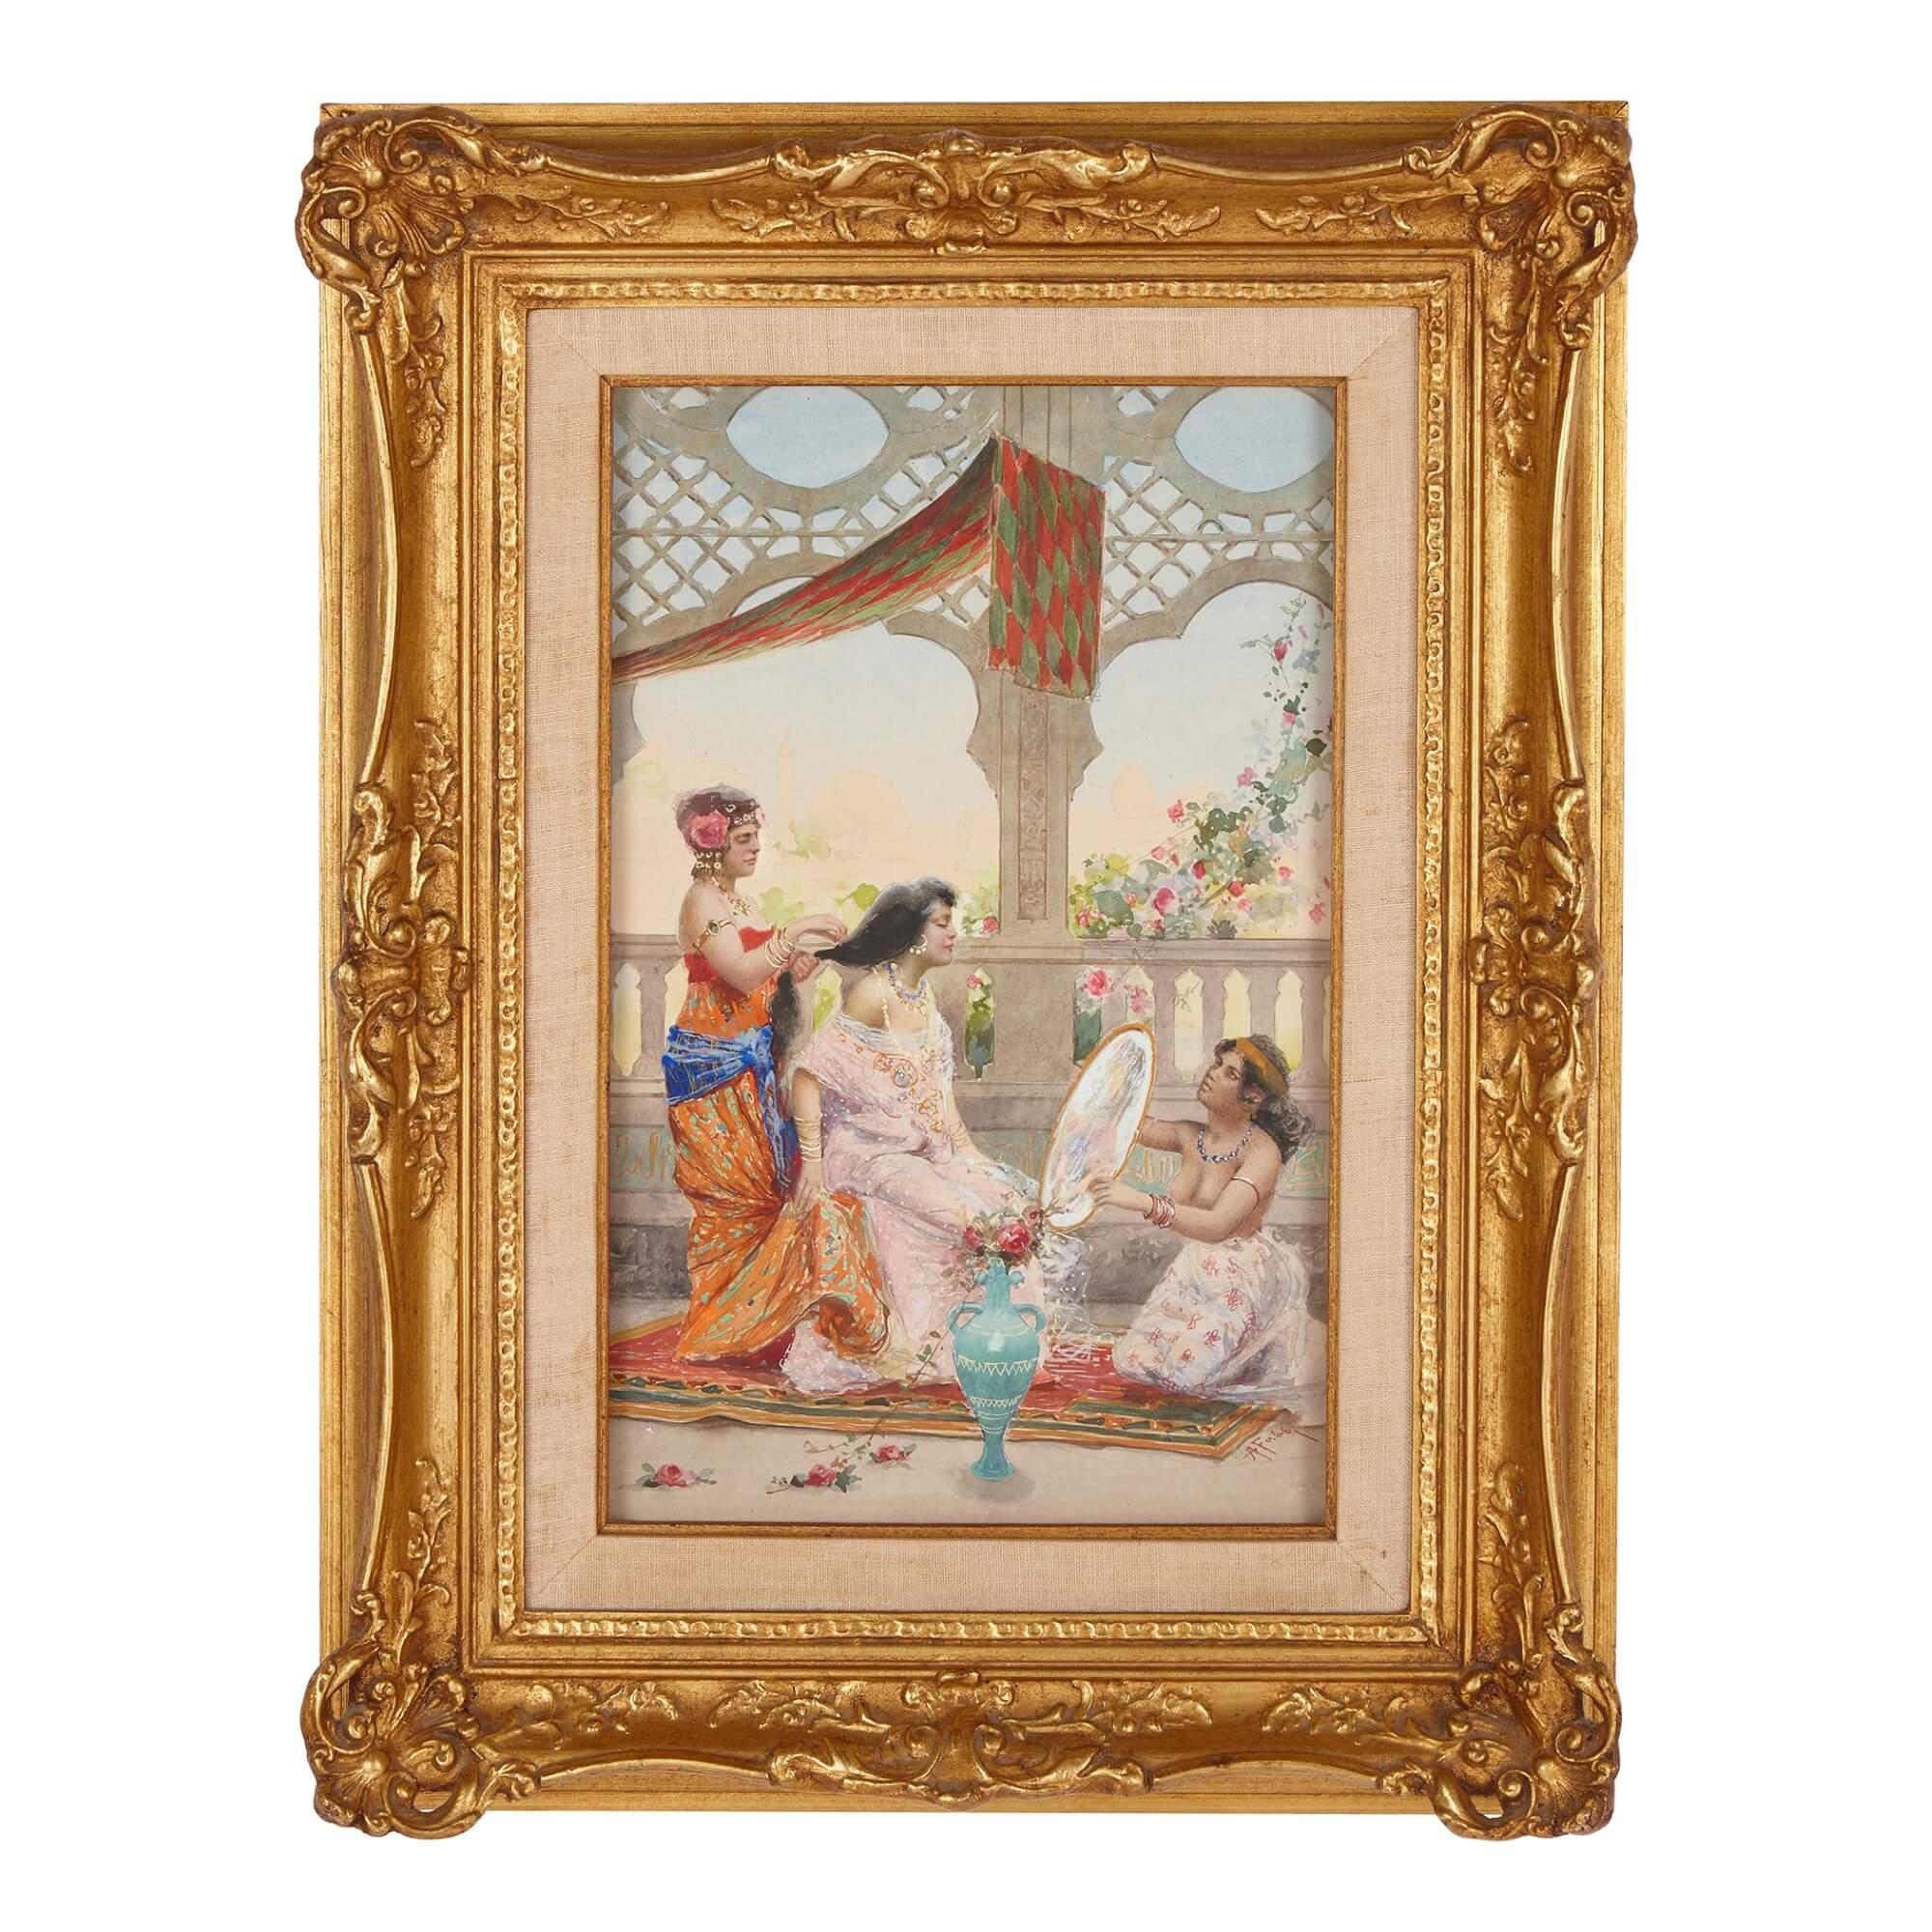 Alberto Fabbi Figurative Painting - Orientalist Antique Watercolour Painting of A Woman Dressing, A. Fabbi